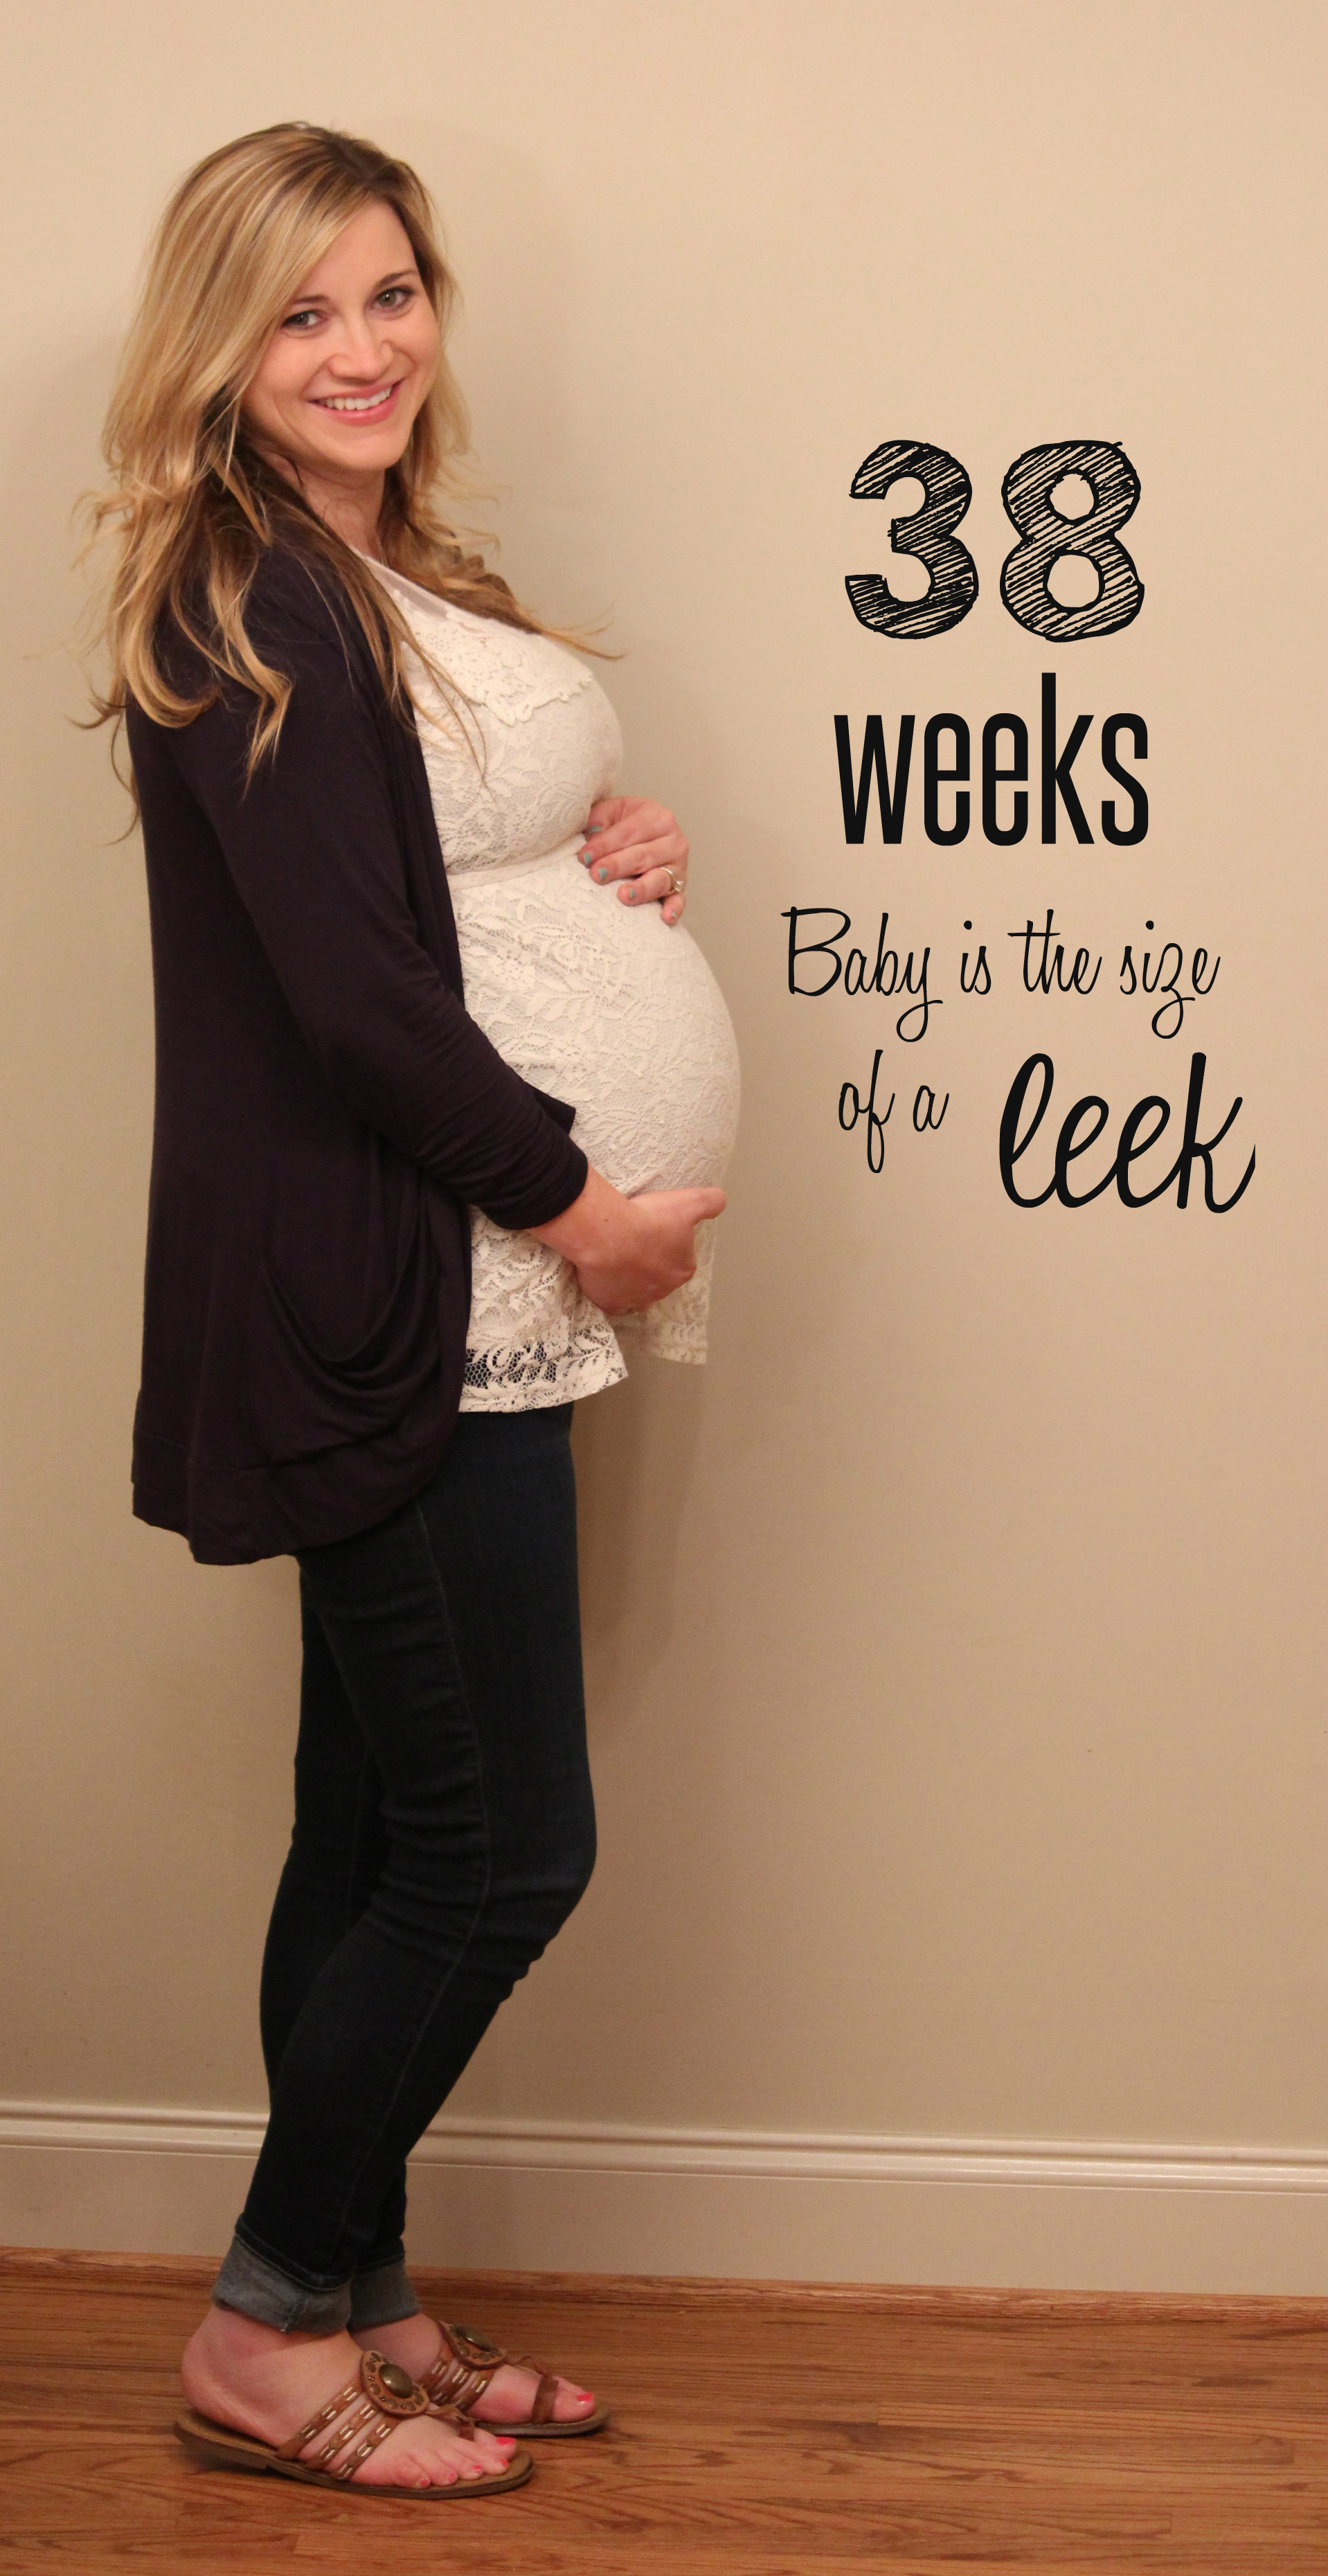 38 Weeks Baby Development Milestone: A Guide for Expecting Parents